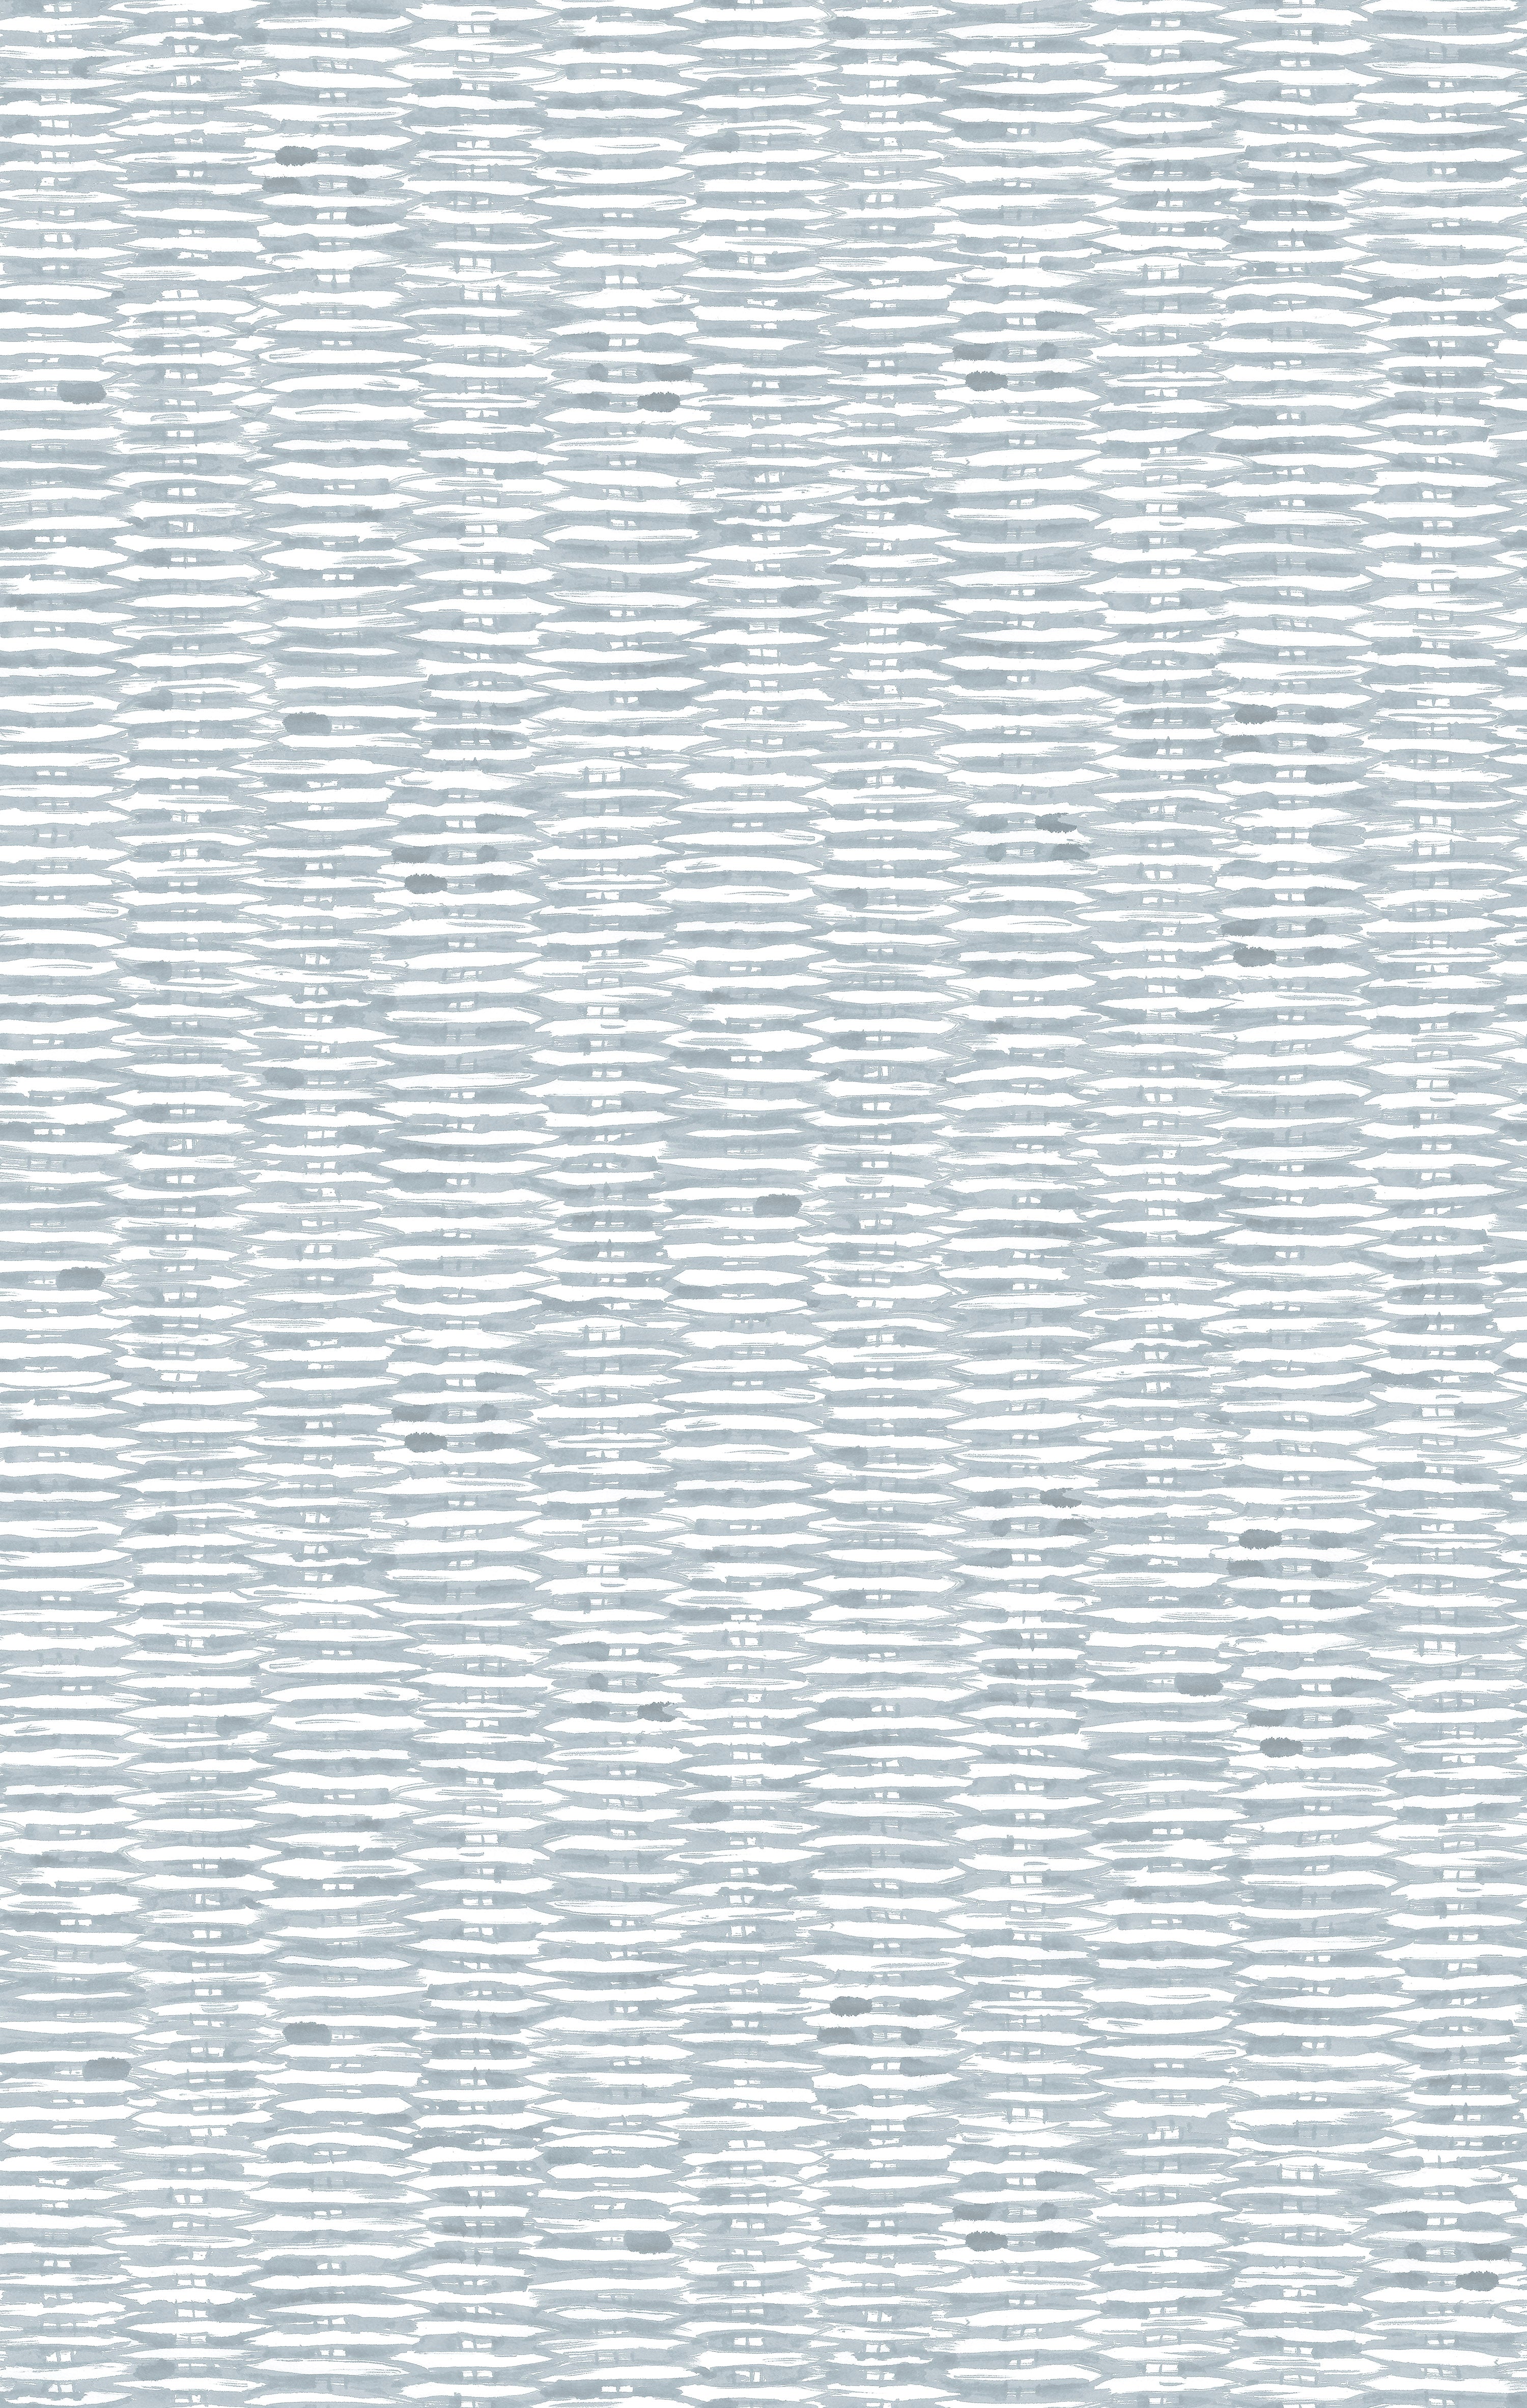 Detail of wallpaper in a textural checked print in light blue on a white field.